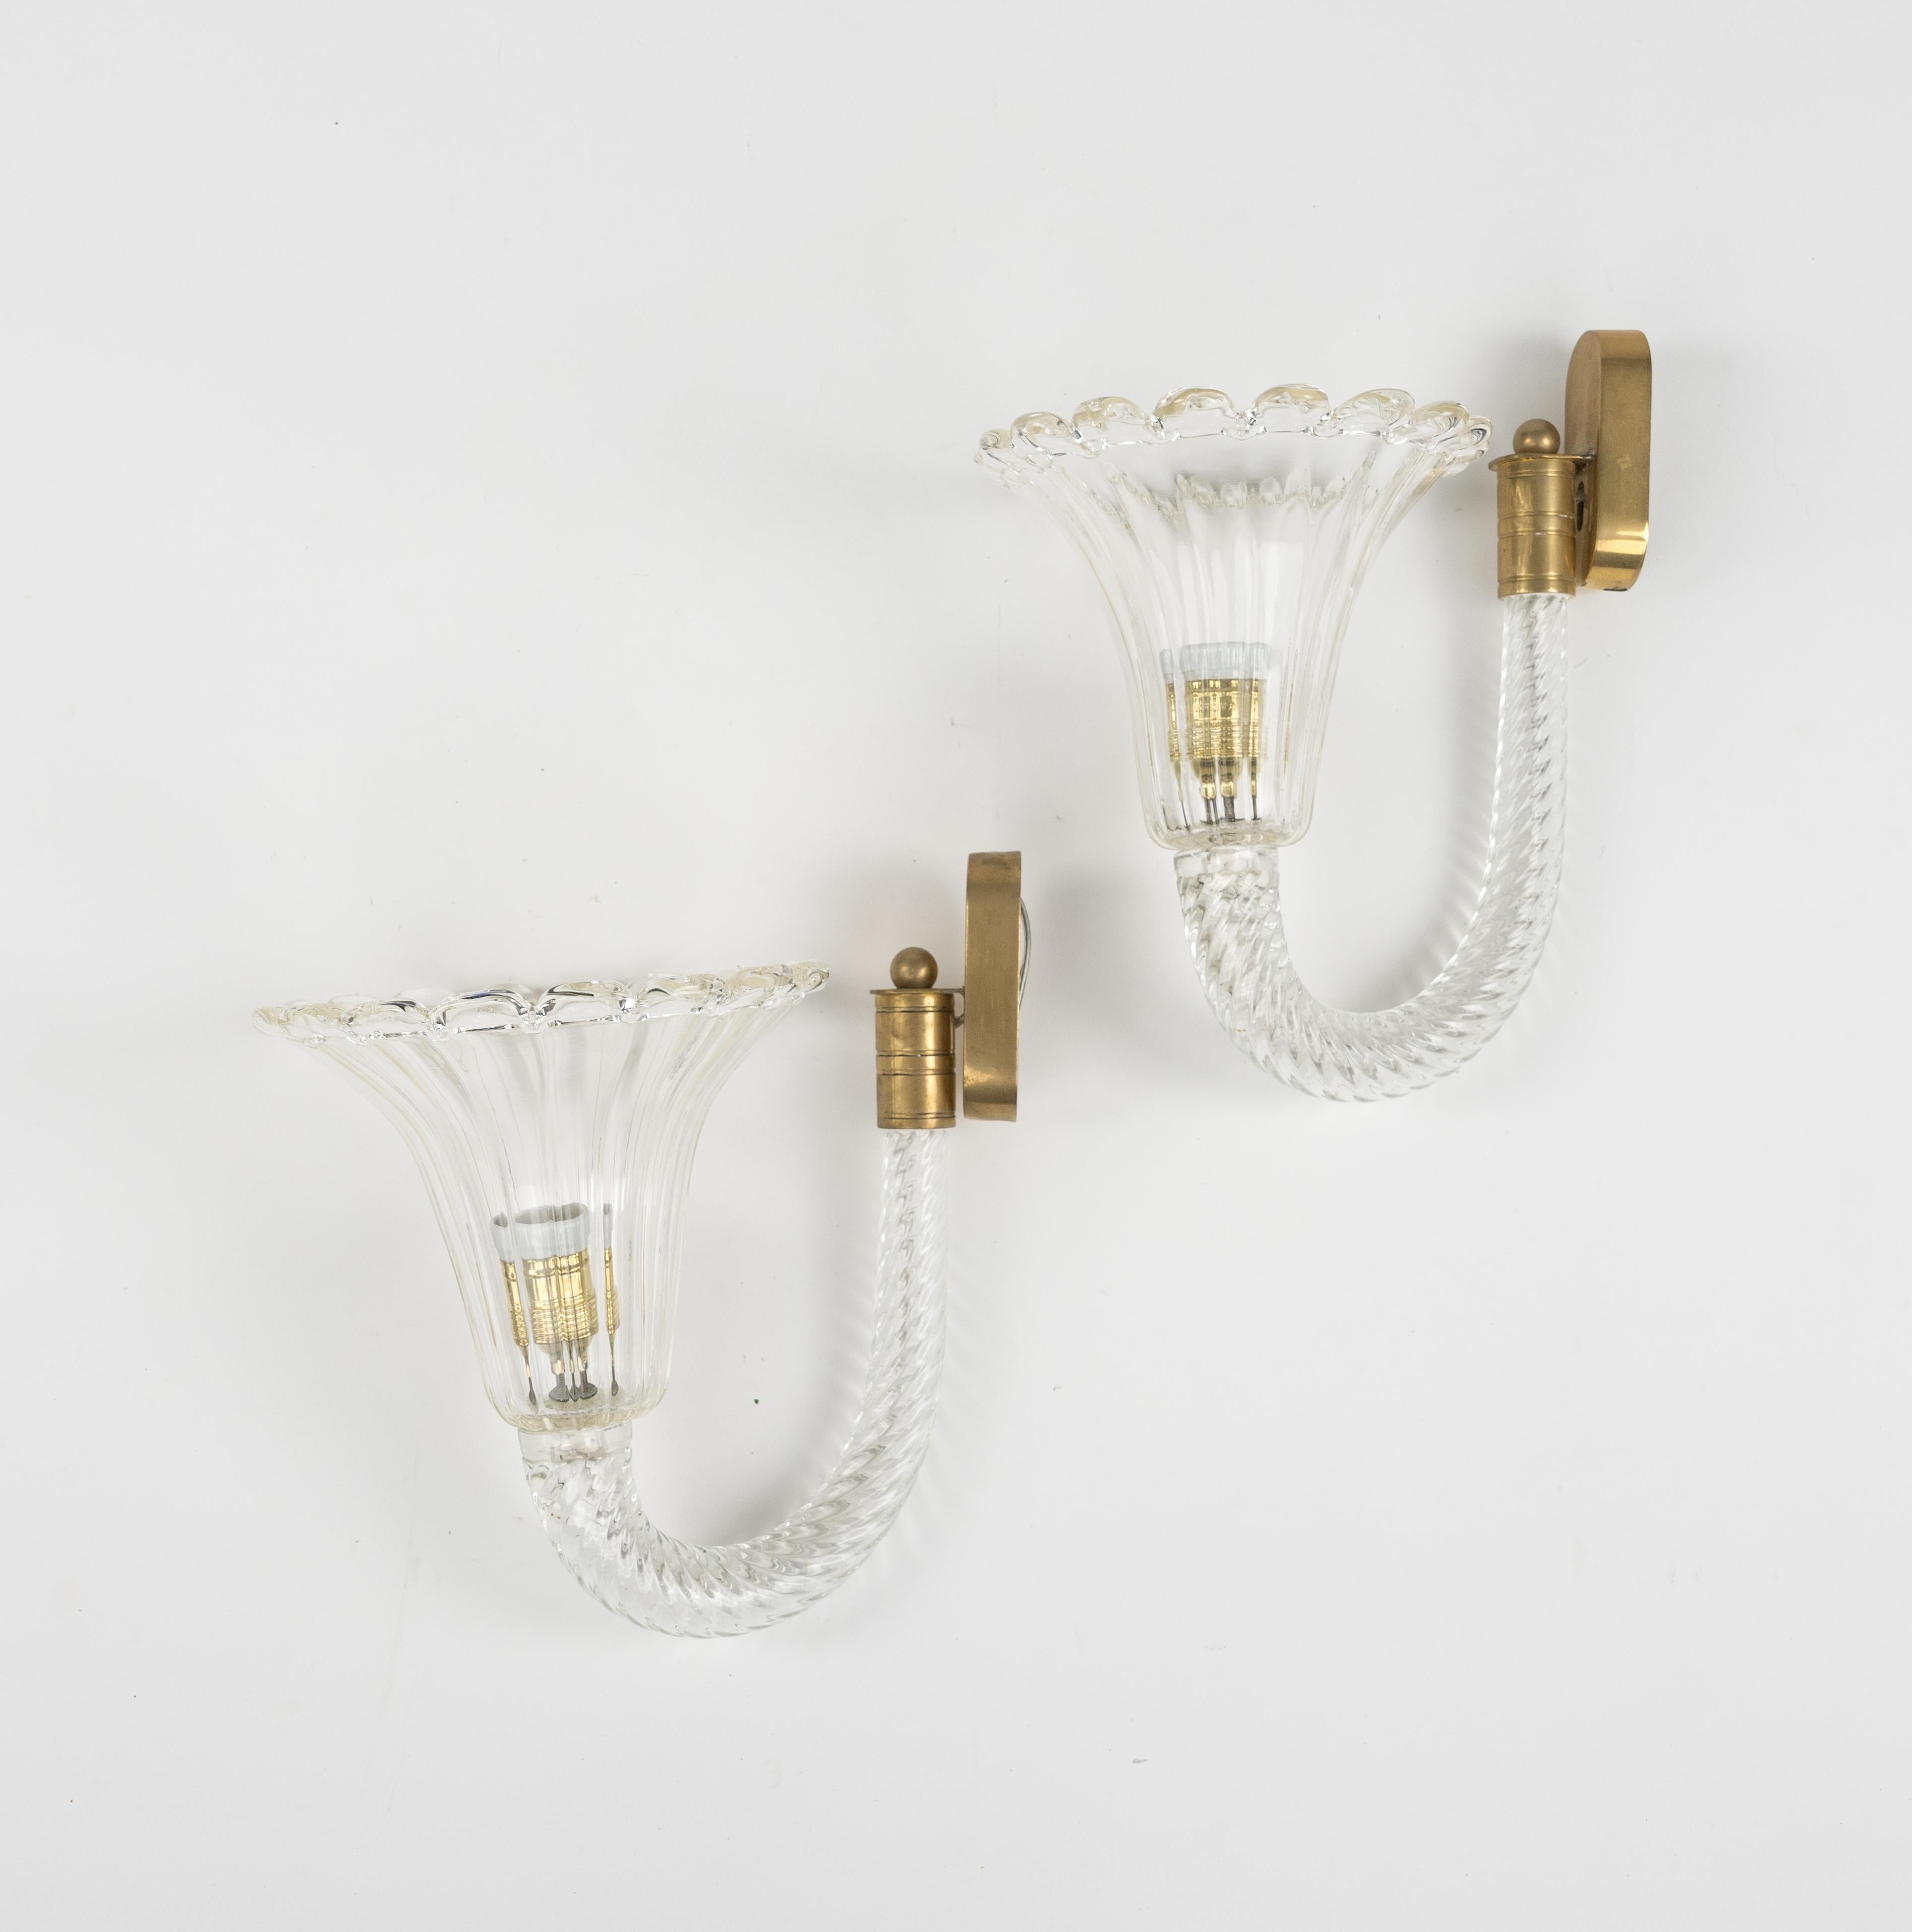 Pair of Sconces Murano Glass & Brass Barovier & Toso Style, Italy 1950s For Sale 7